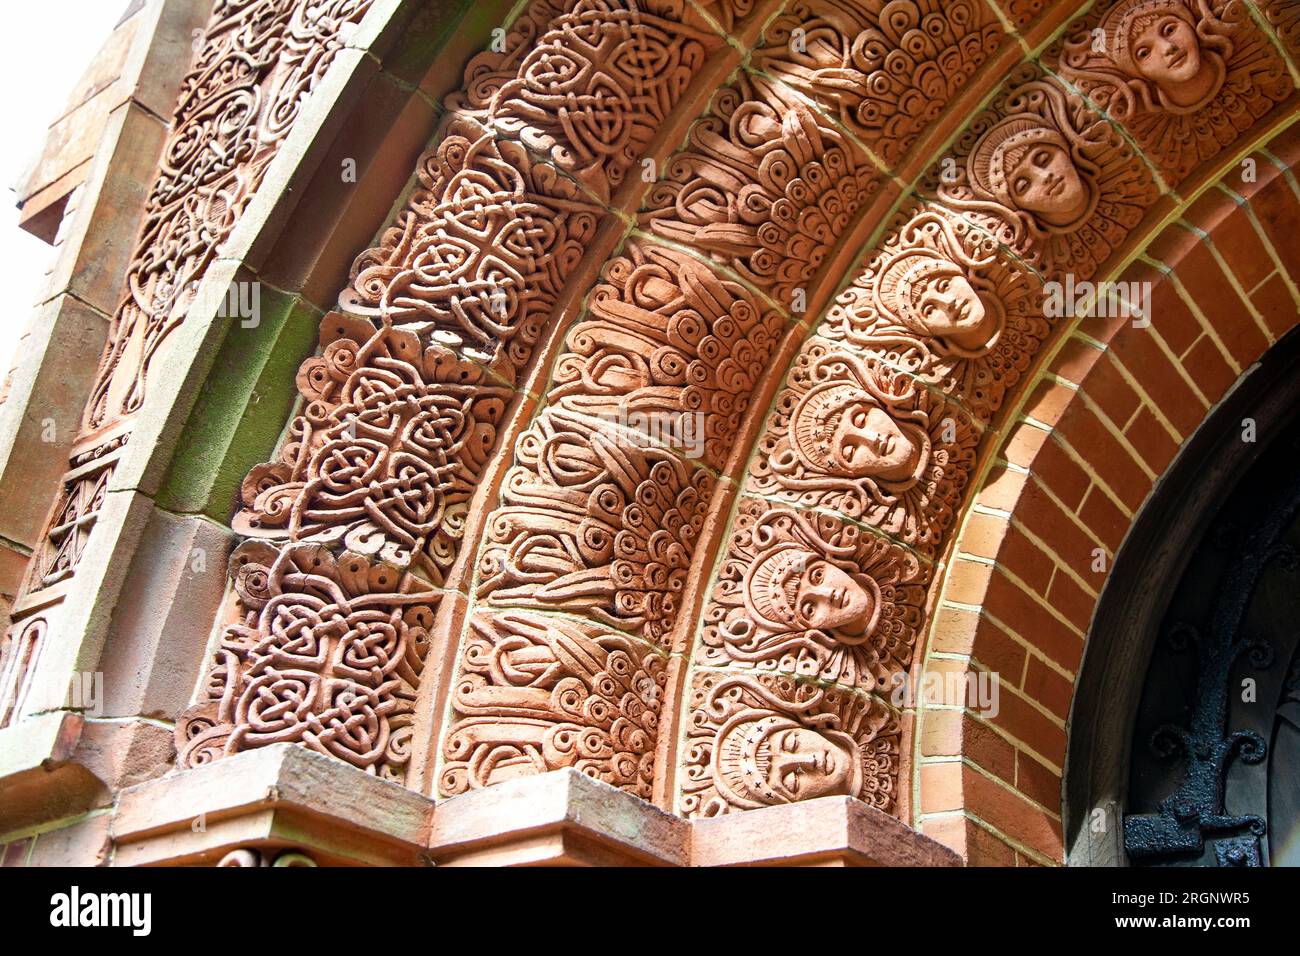 Celtic and art nouveau style relief in the doorway archivolt of the Watts Chapel, Compton, Surrey, England Stock Photo